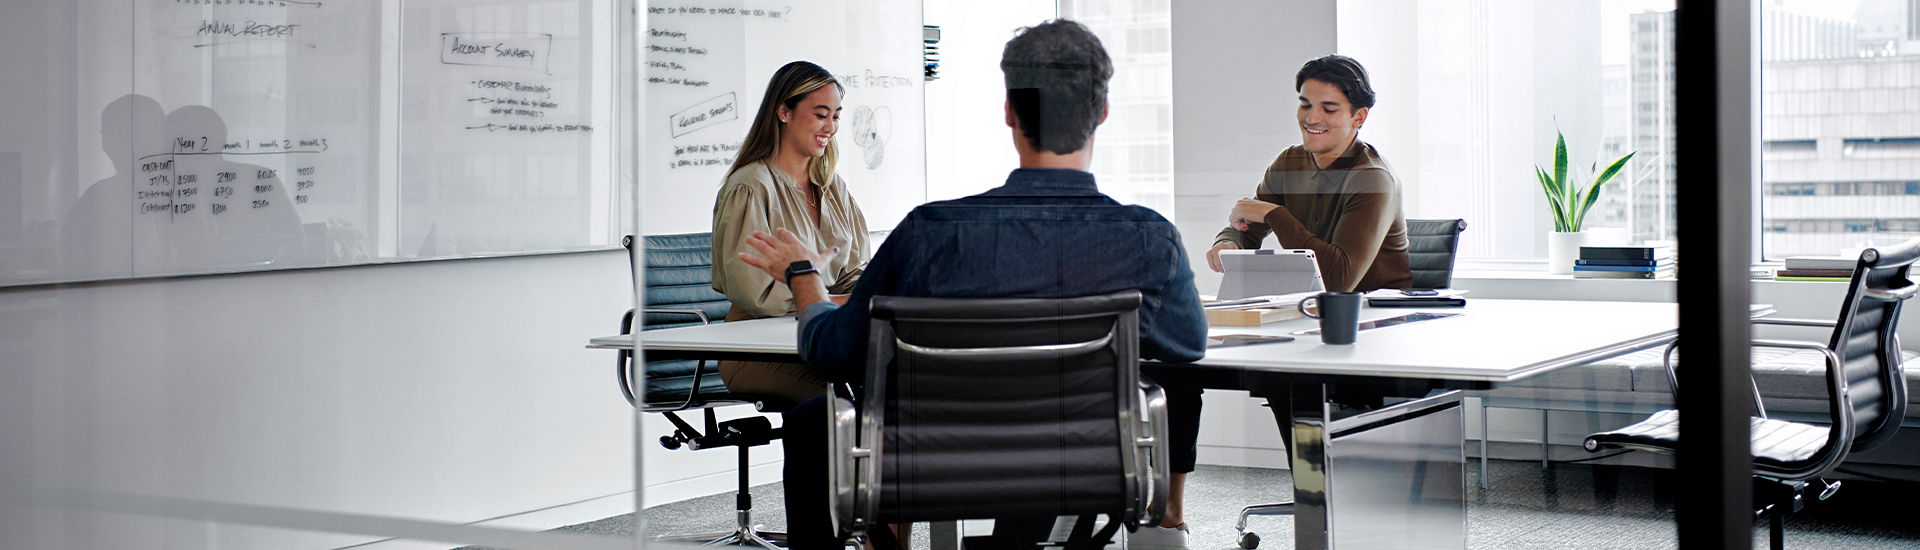 office meeting room with three people at a table in front of a whiteboard